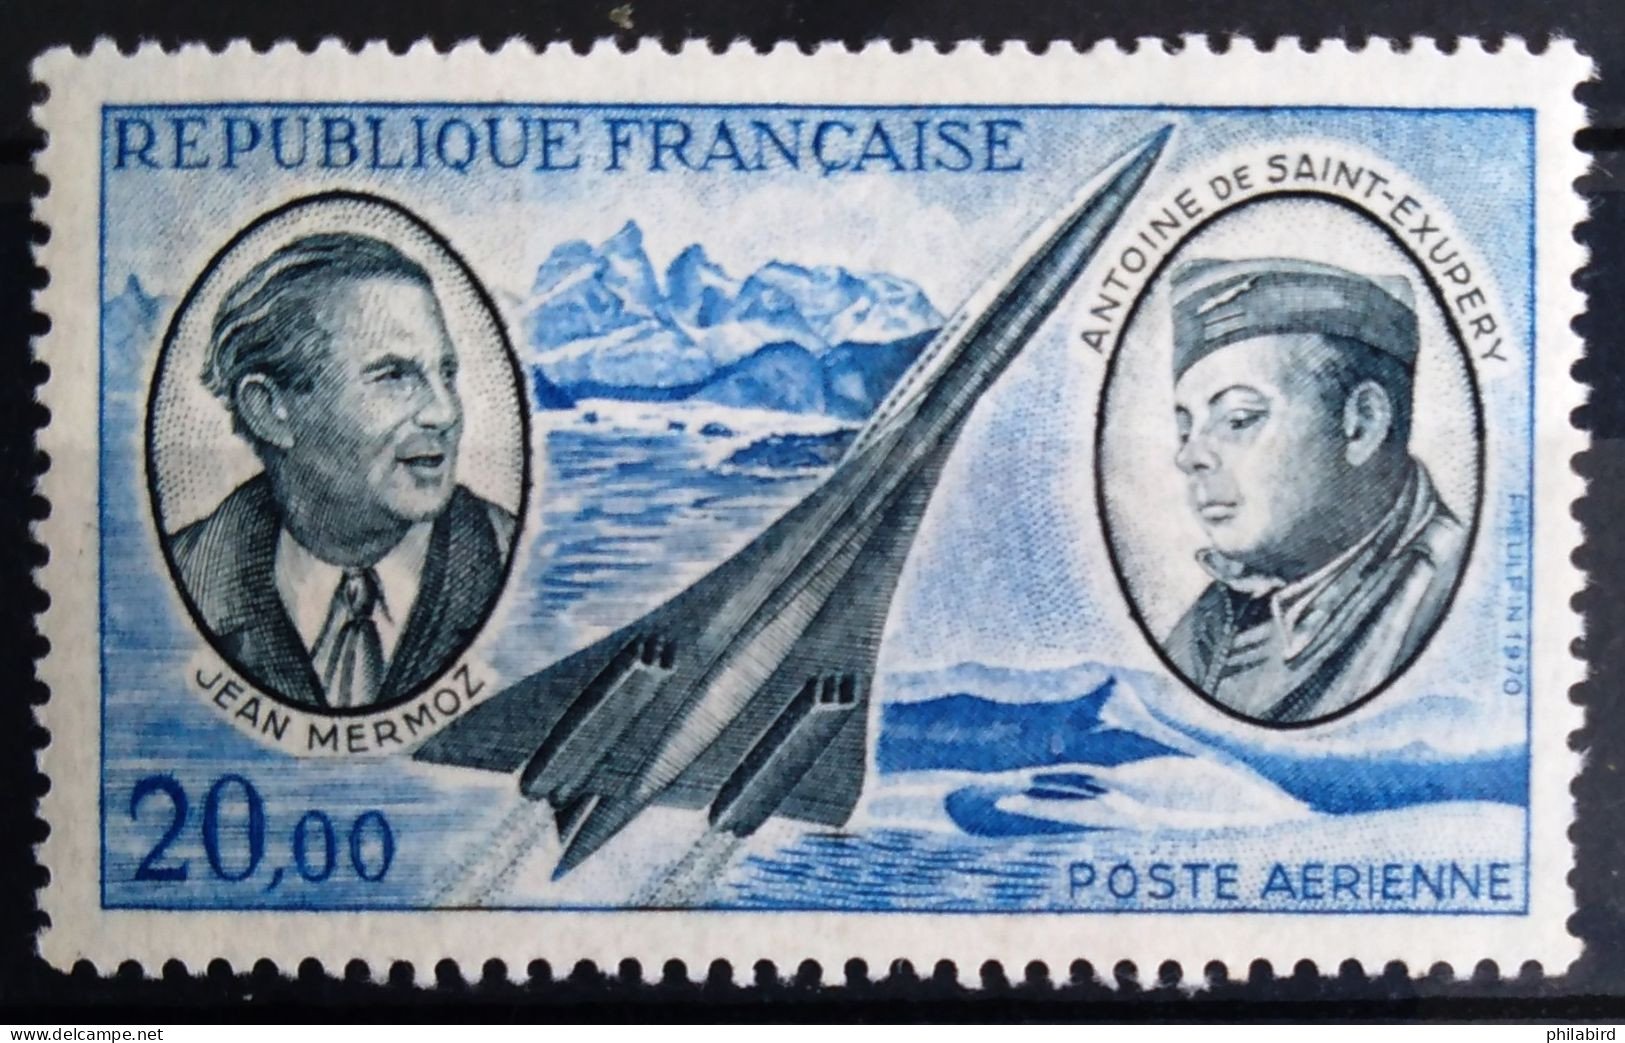 FRANCE                      P.A 44                      NEUF** - 1960-.... Mint/hinged